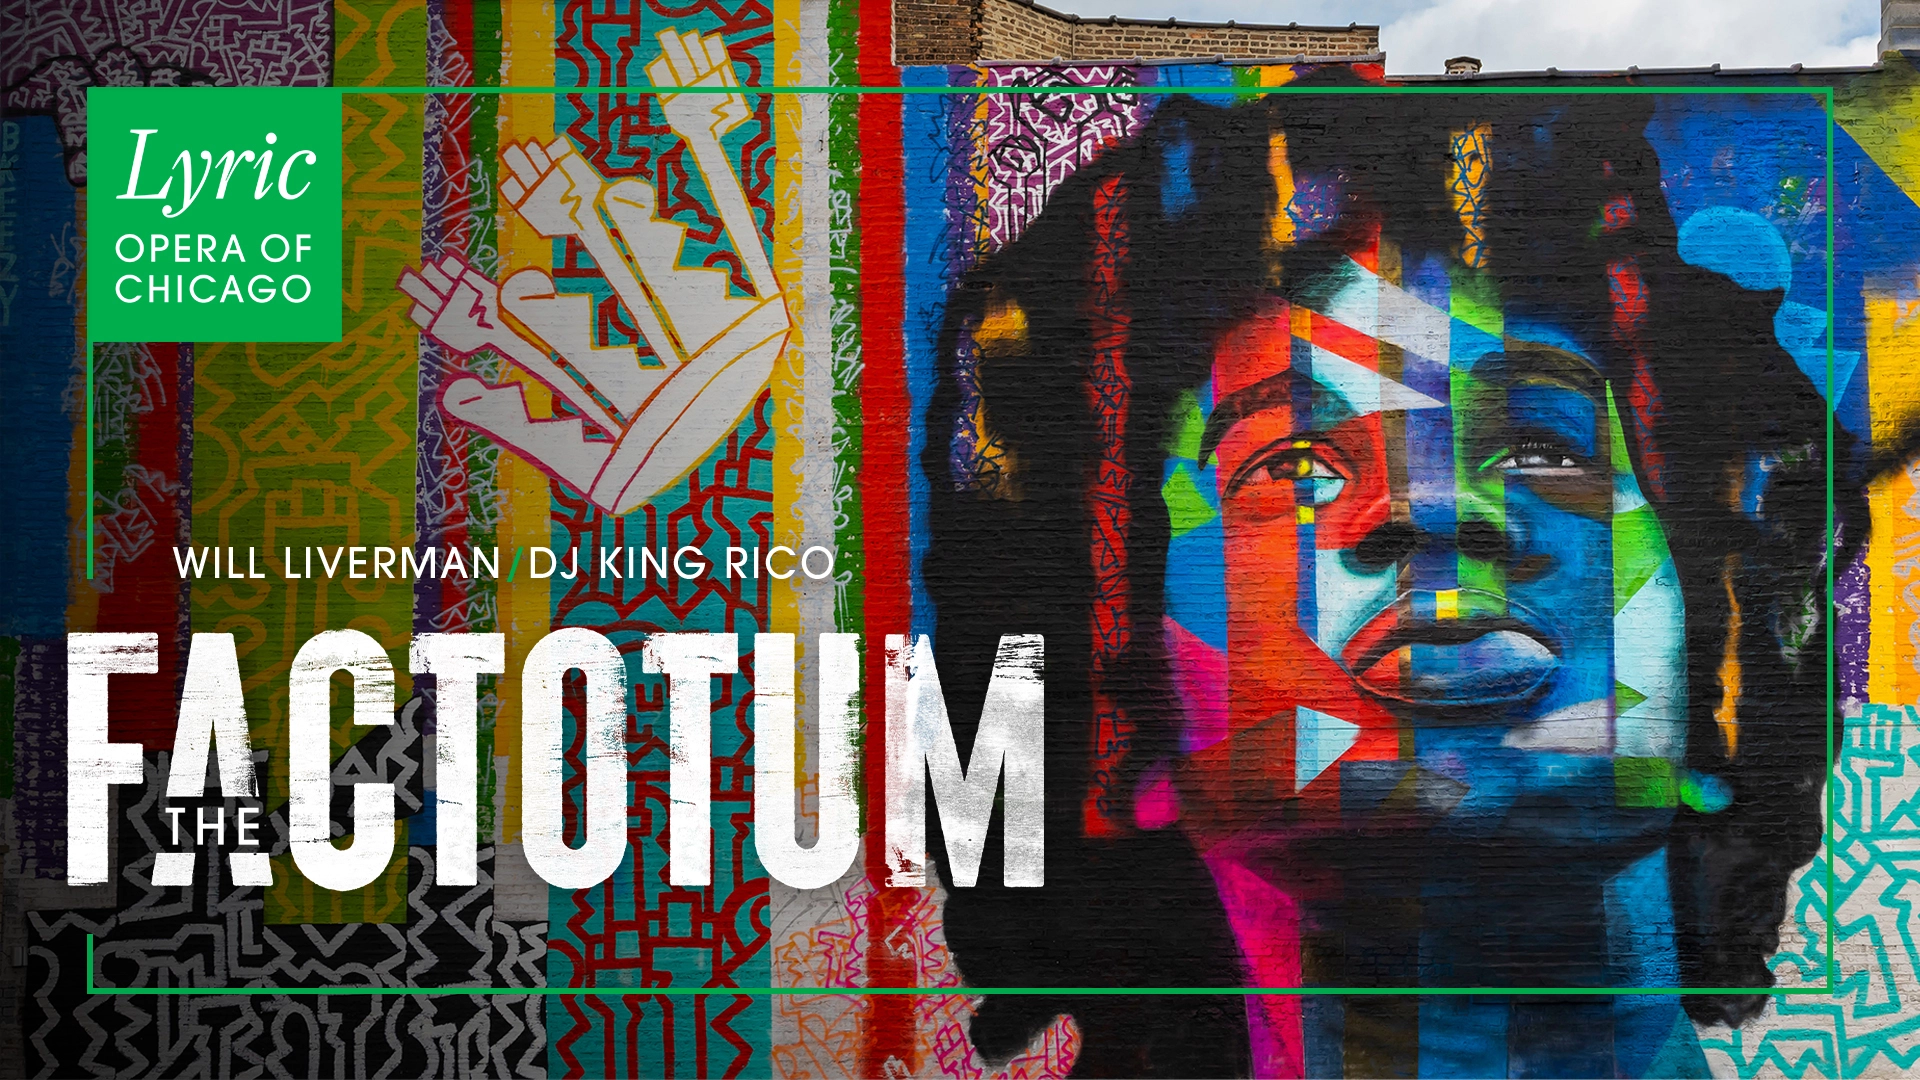 Image of a multicolored mural. The work features the face of an African American young person with a large afro and a crown. Text reads "The Factotum".